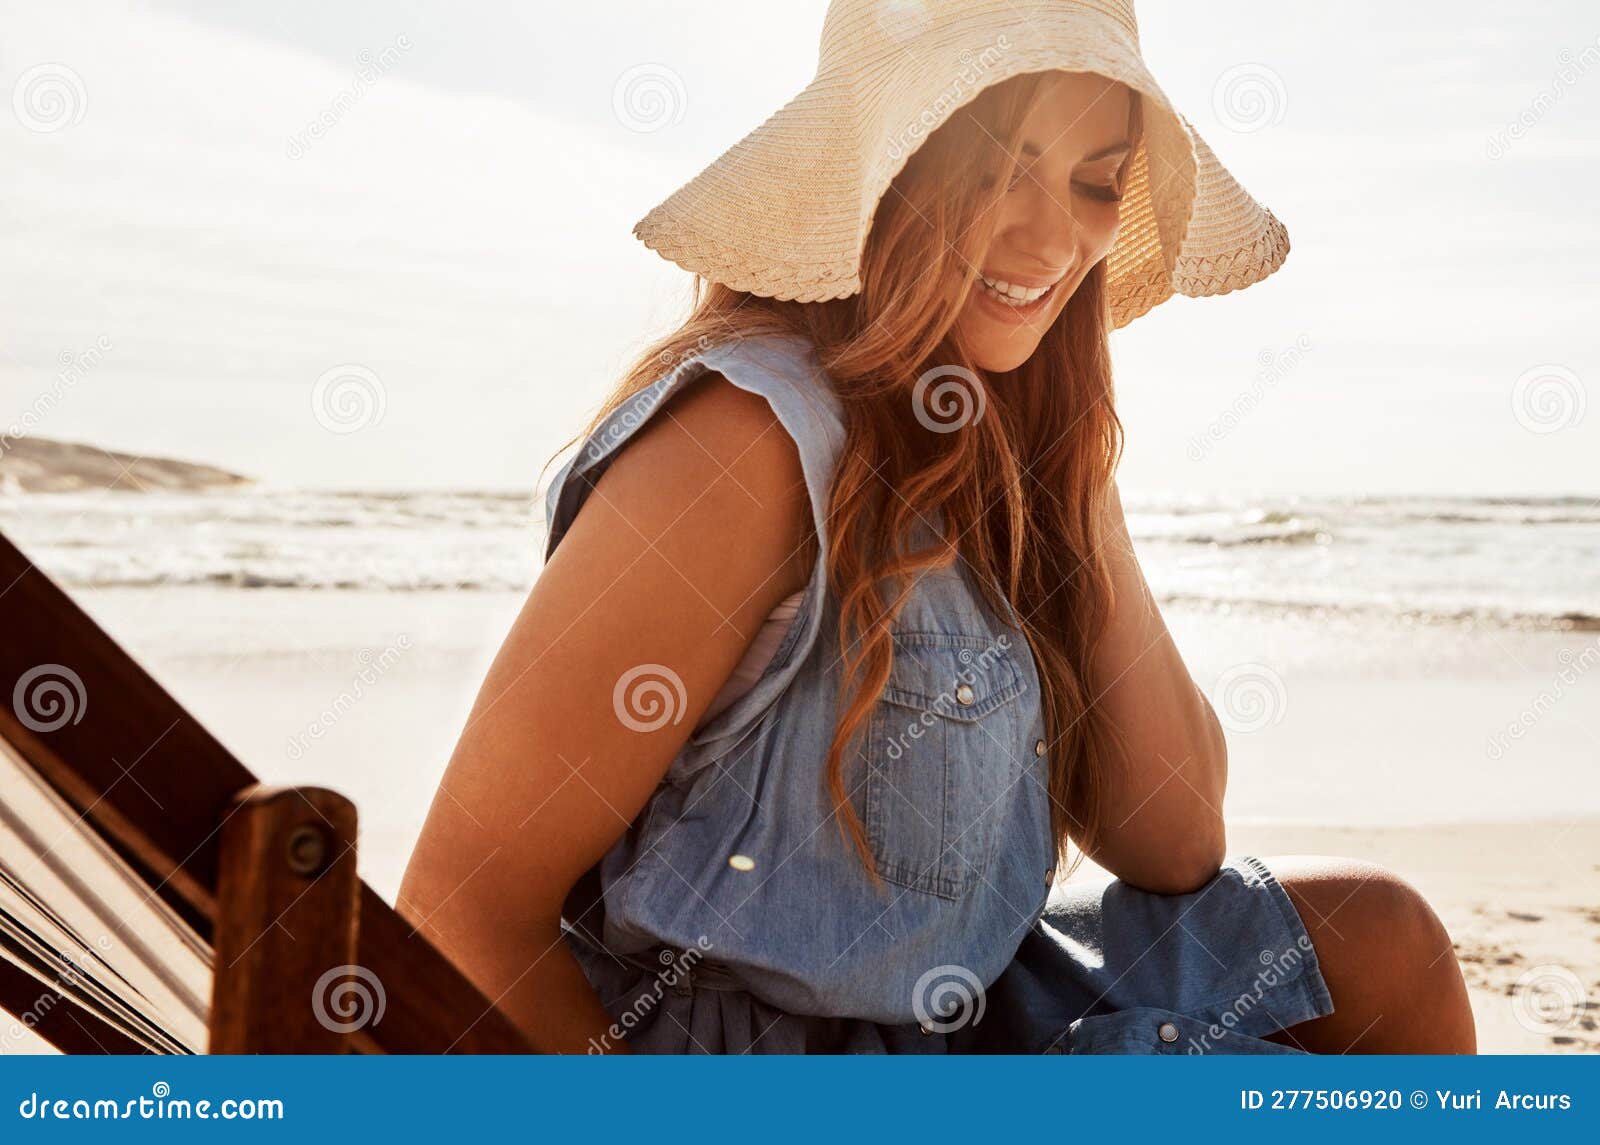 Youll Often Find Her Lounging at the Beach. a Young Woman Relaxing on a ...